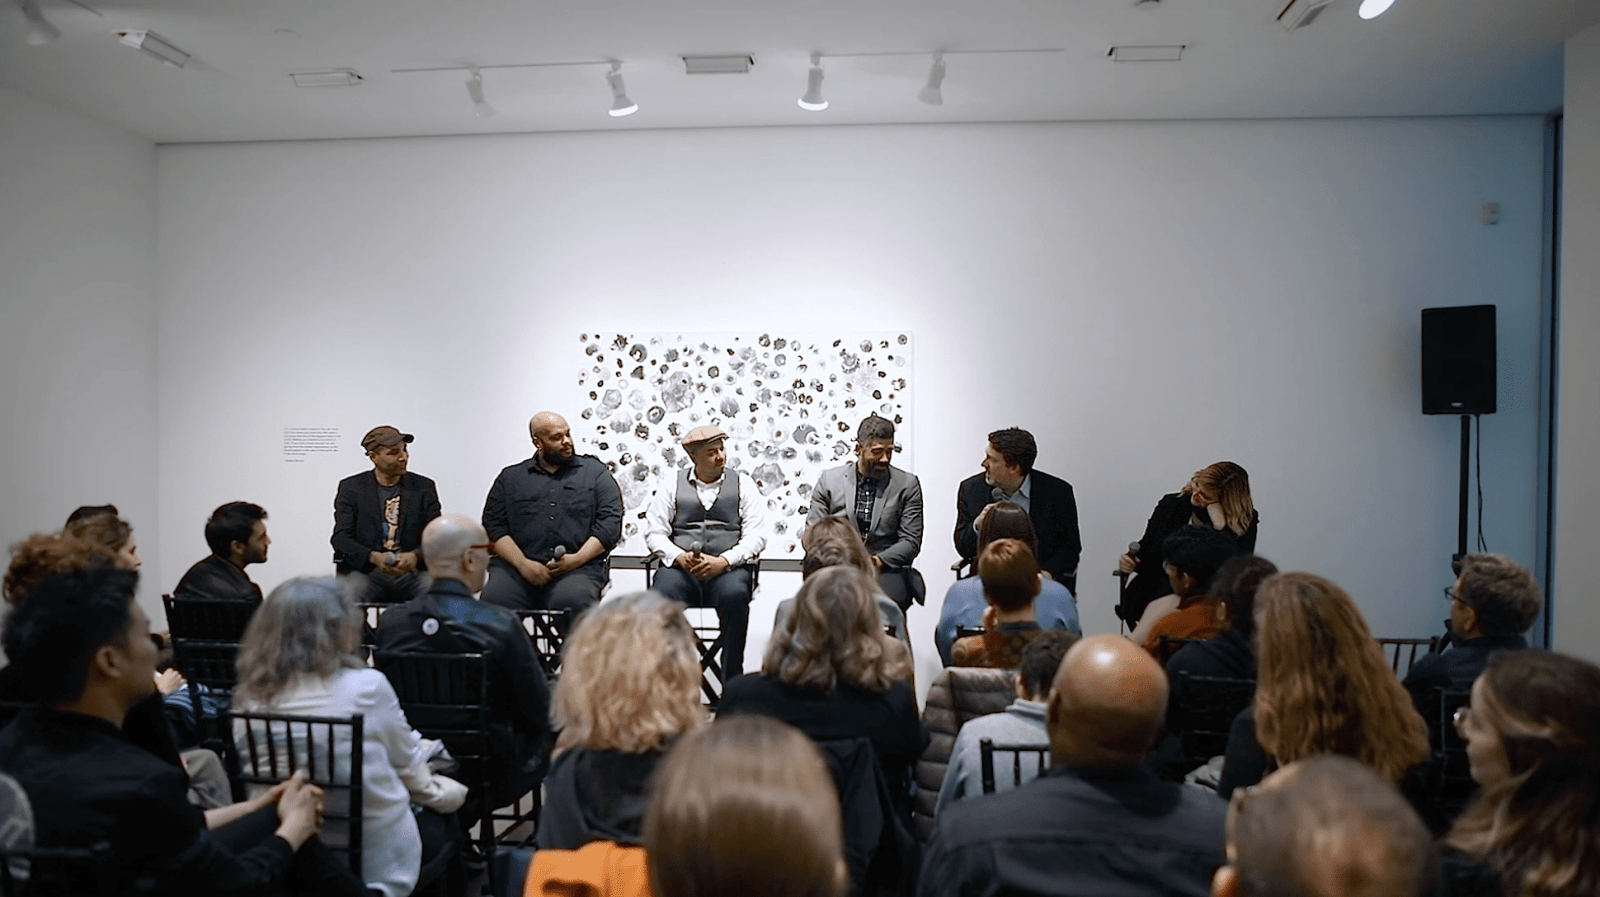 Past, Present, and Future of Tim Rollins and Studio K.O.S., Panel Discussion